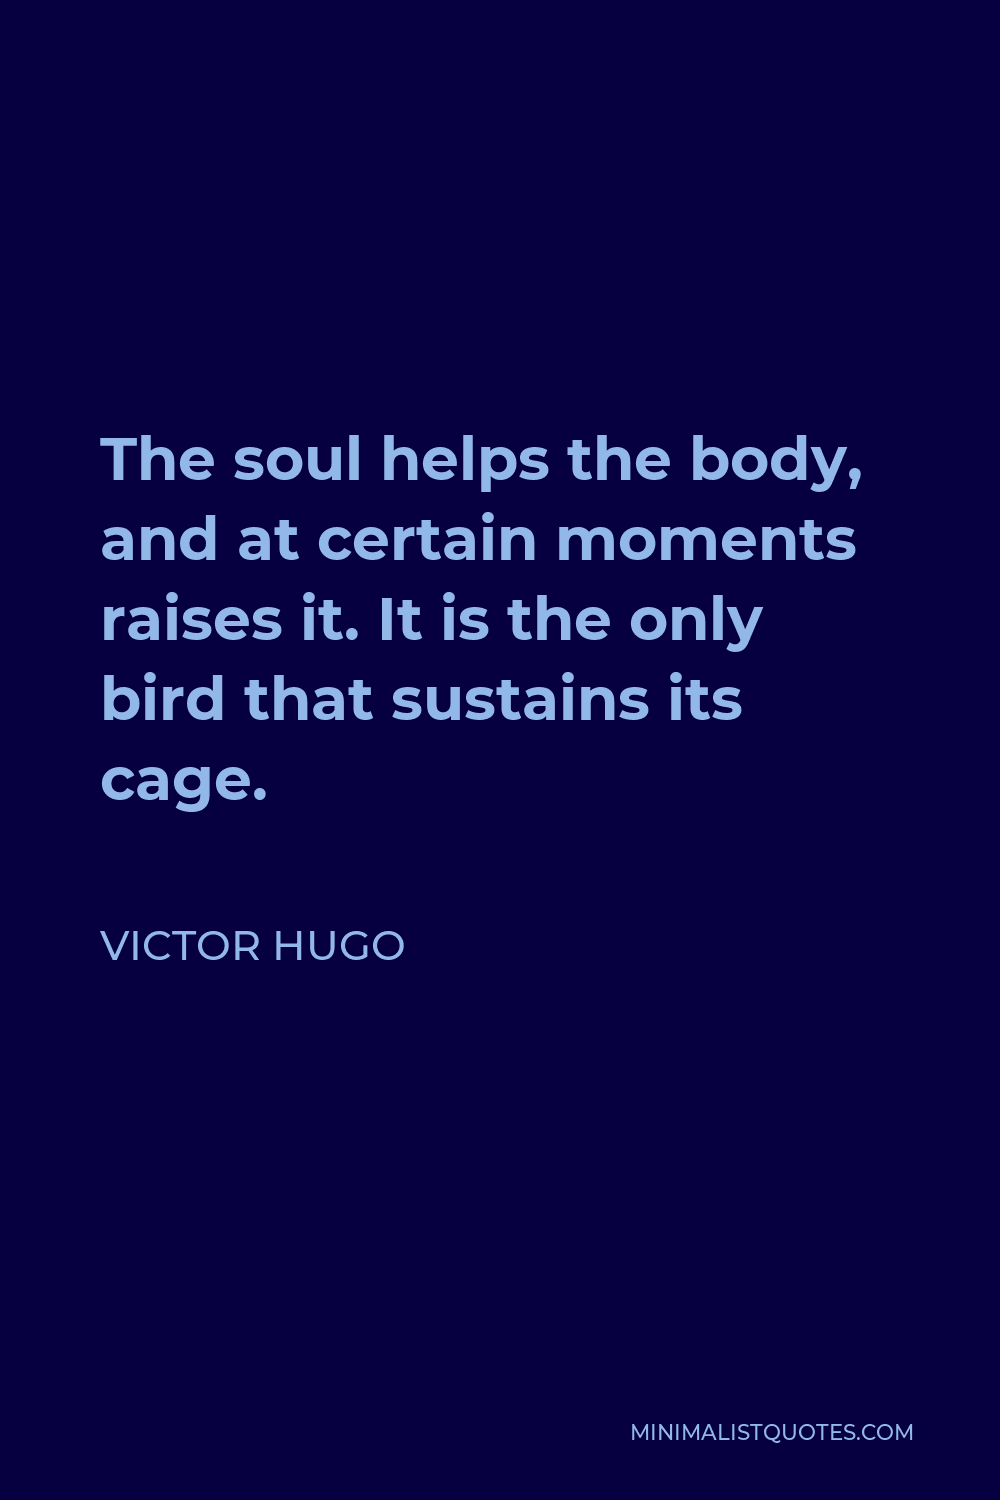 Victor Hugo Quote - The soul helps the body, and at certain moments raises it. It is the only bird that sustains its cage.